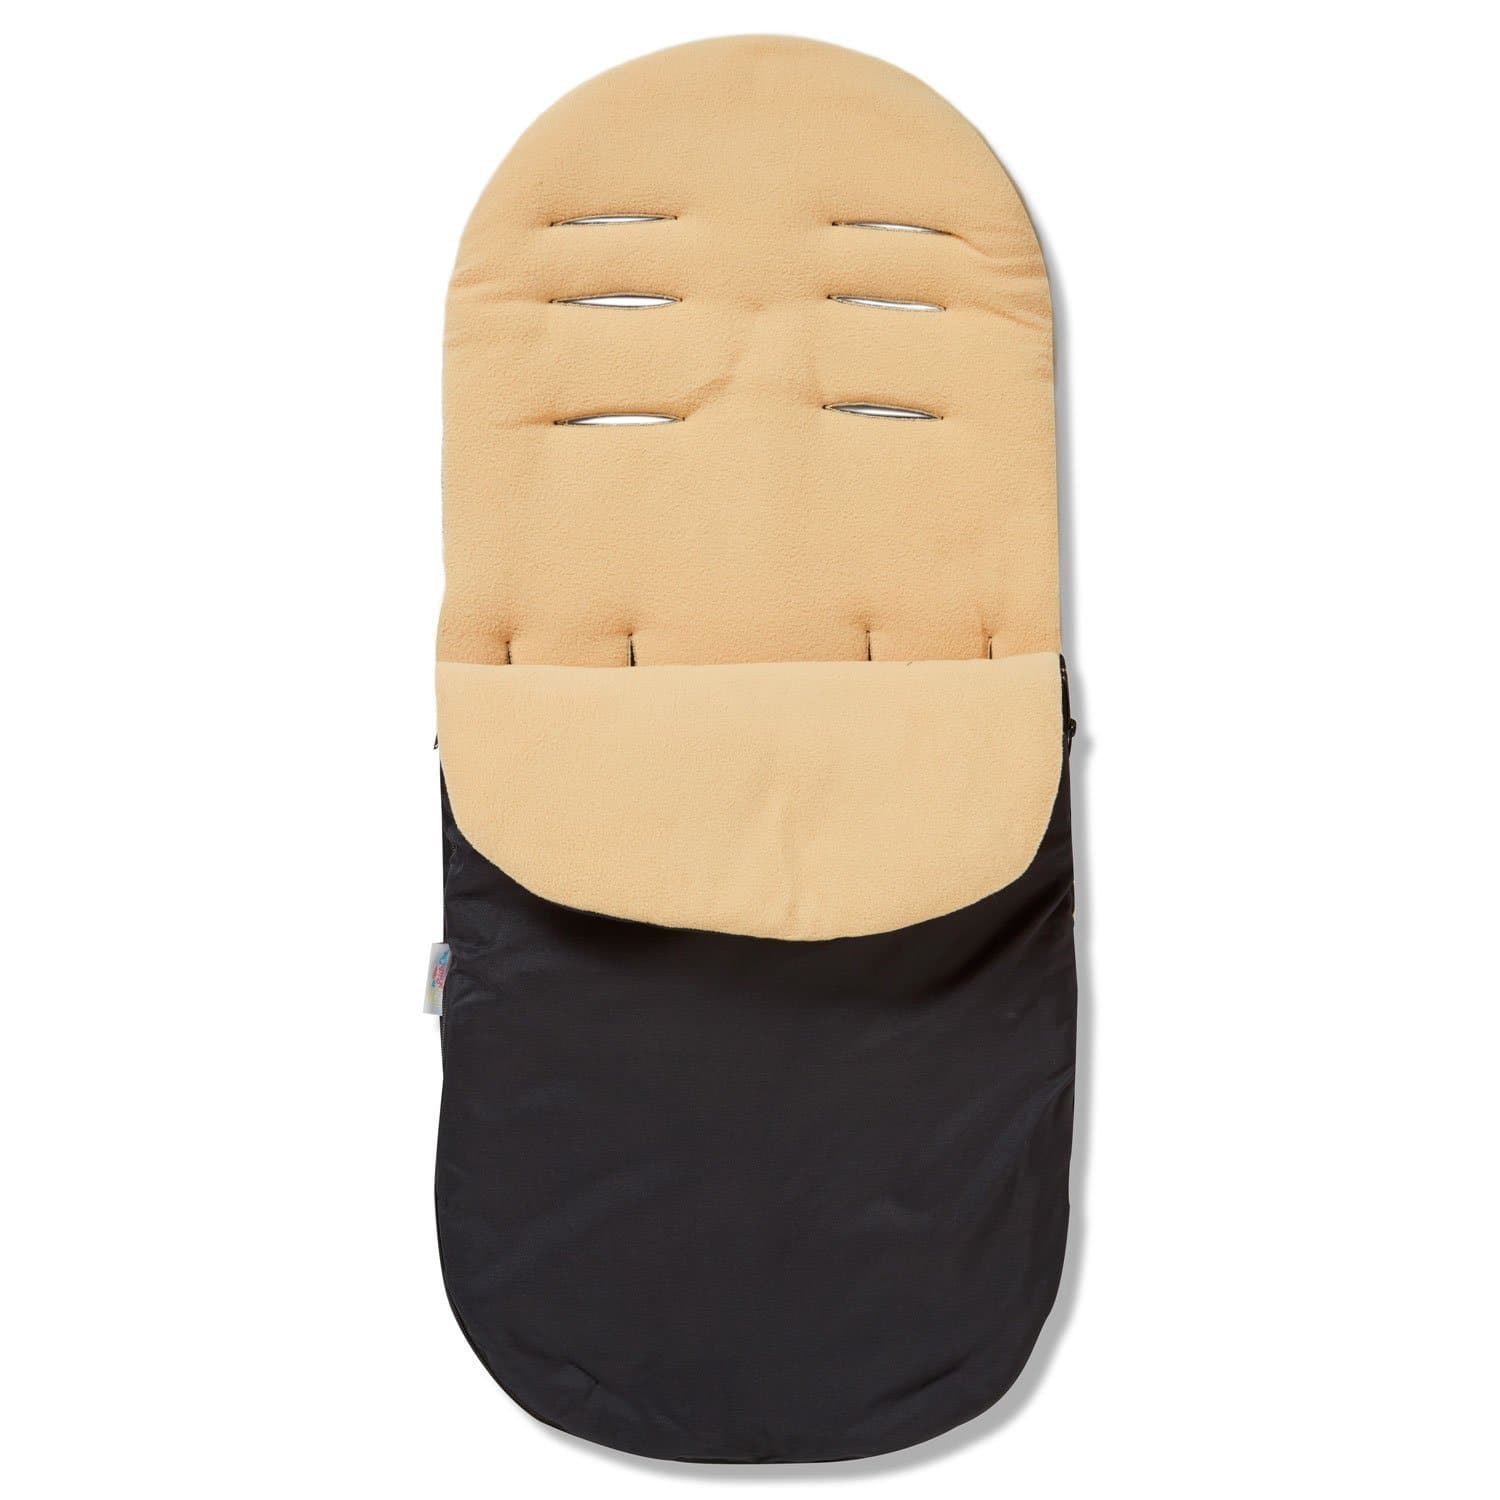 Footmuff / Cosy Toes Compatible with Brevi - For Your Little One